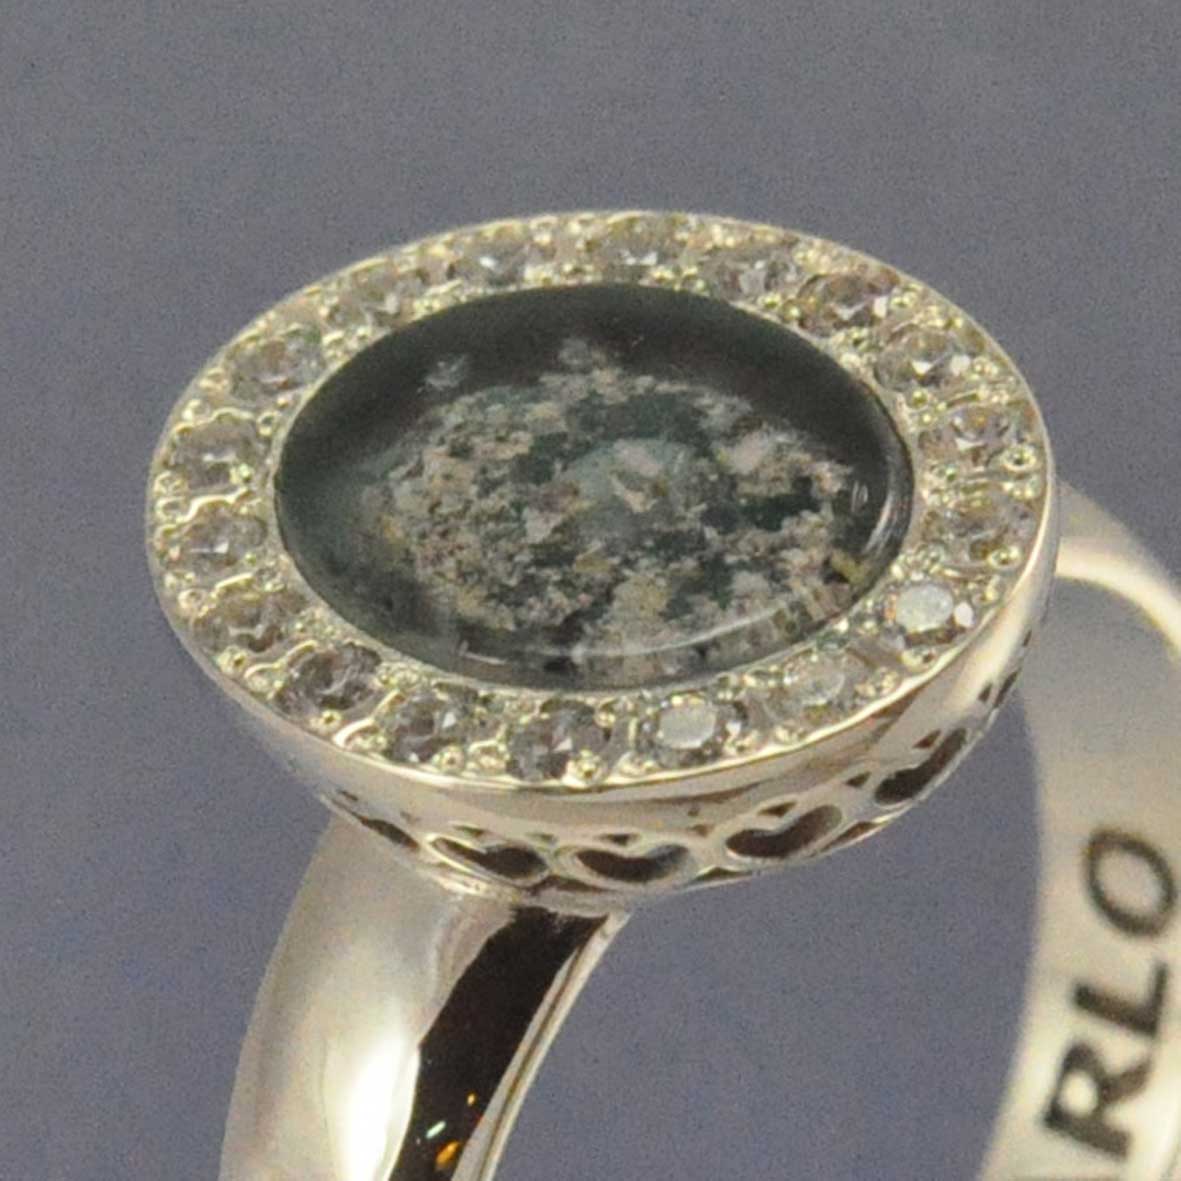 Diamond Cremation Ash Ring - Oval Halo Sparkling Ring by Chris Parry Jewellery